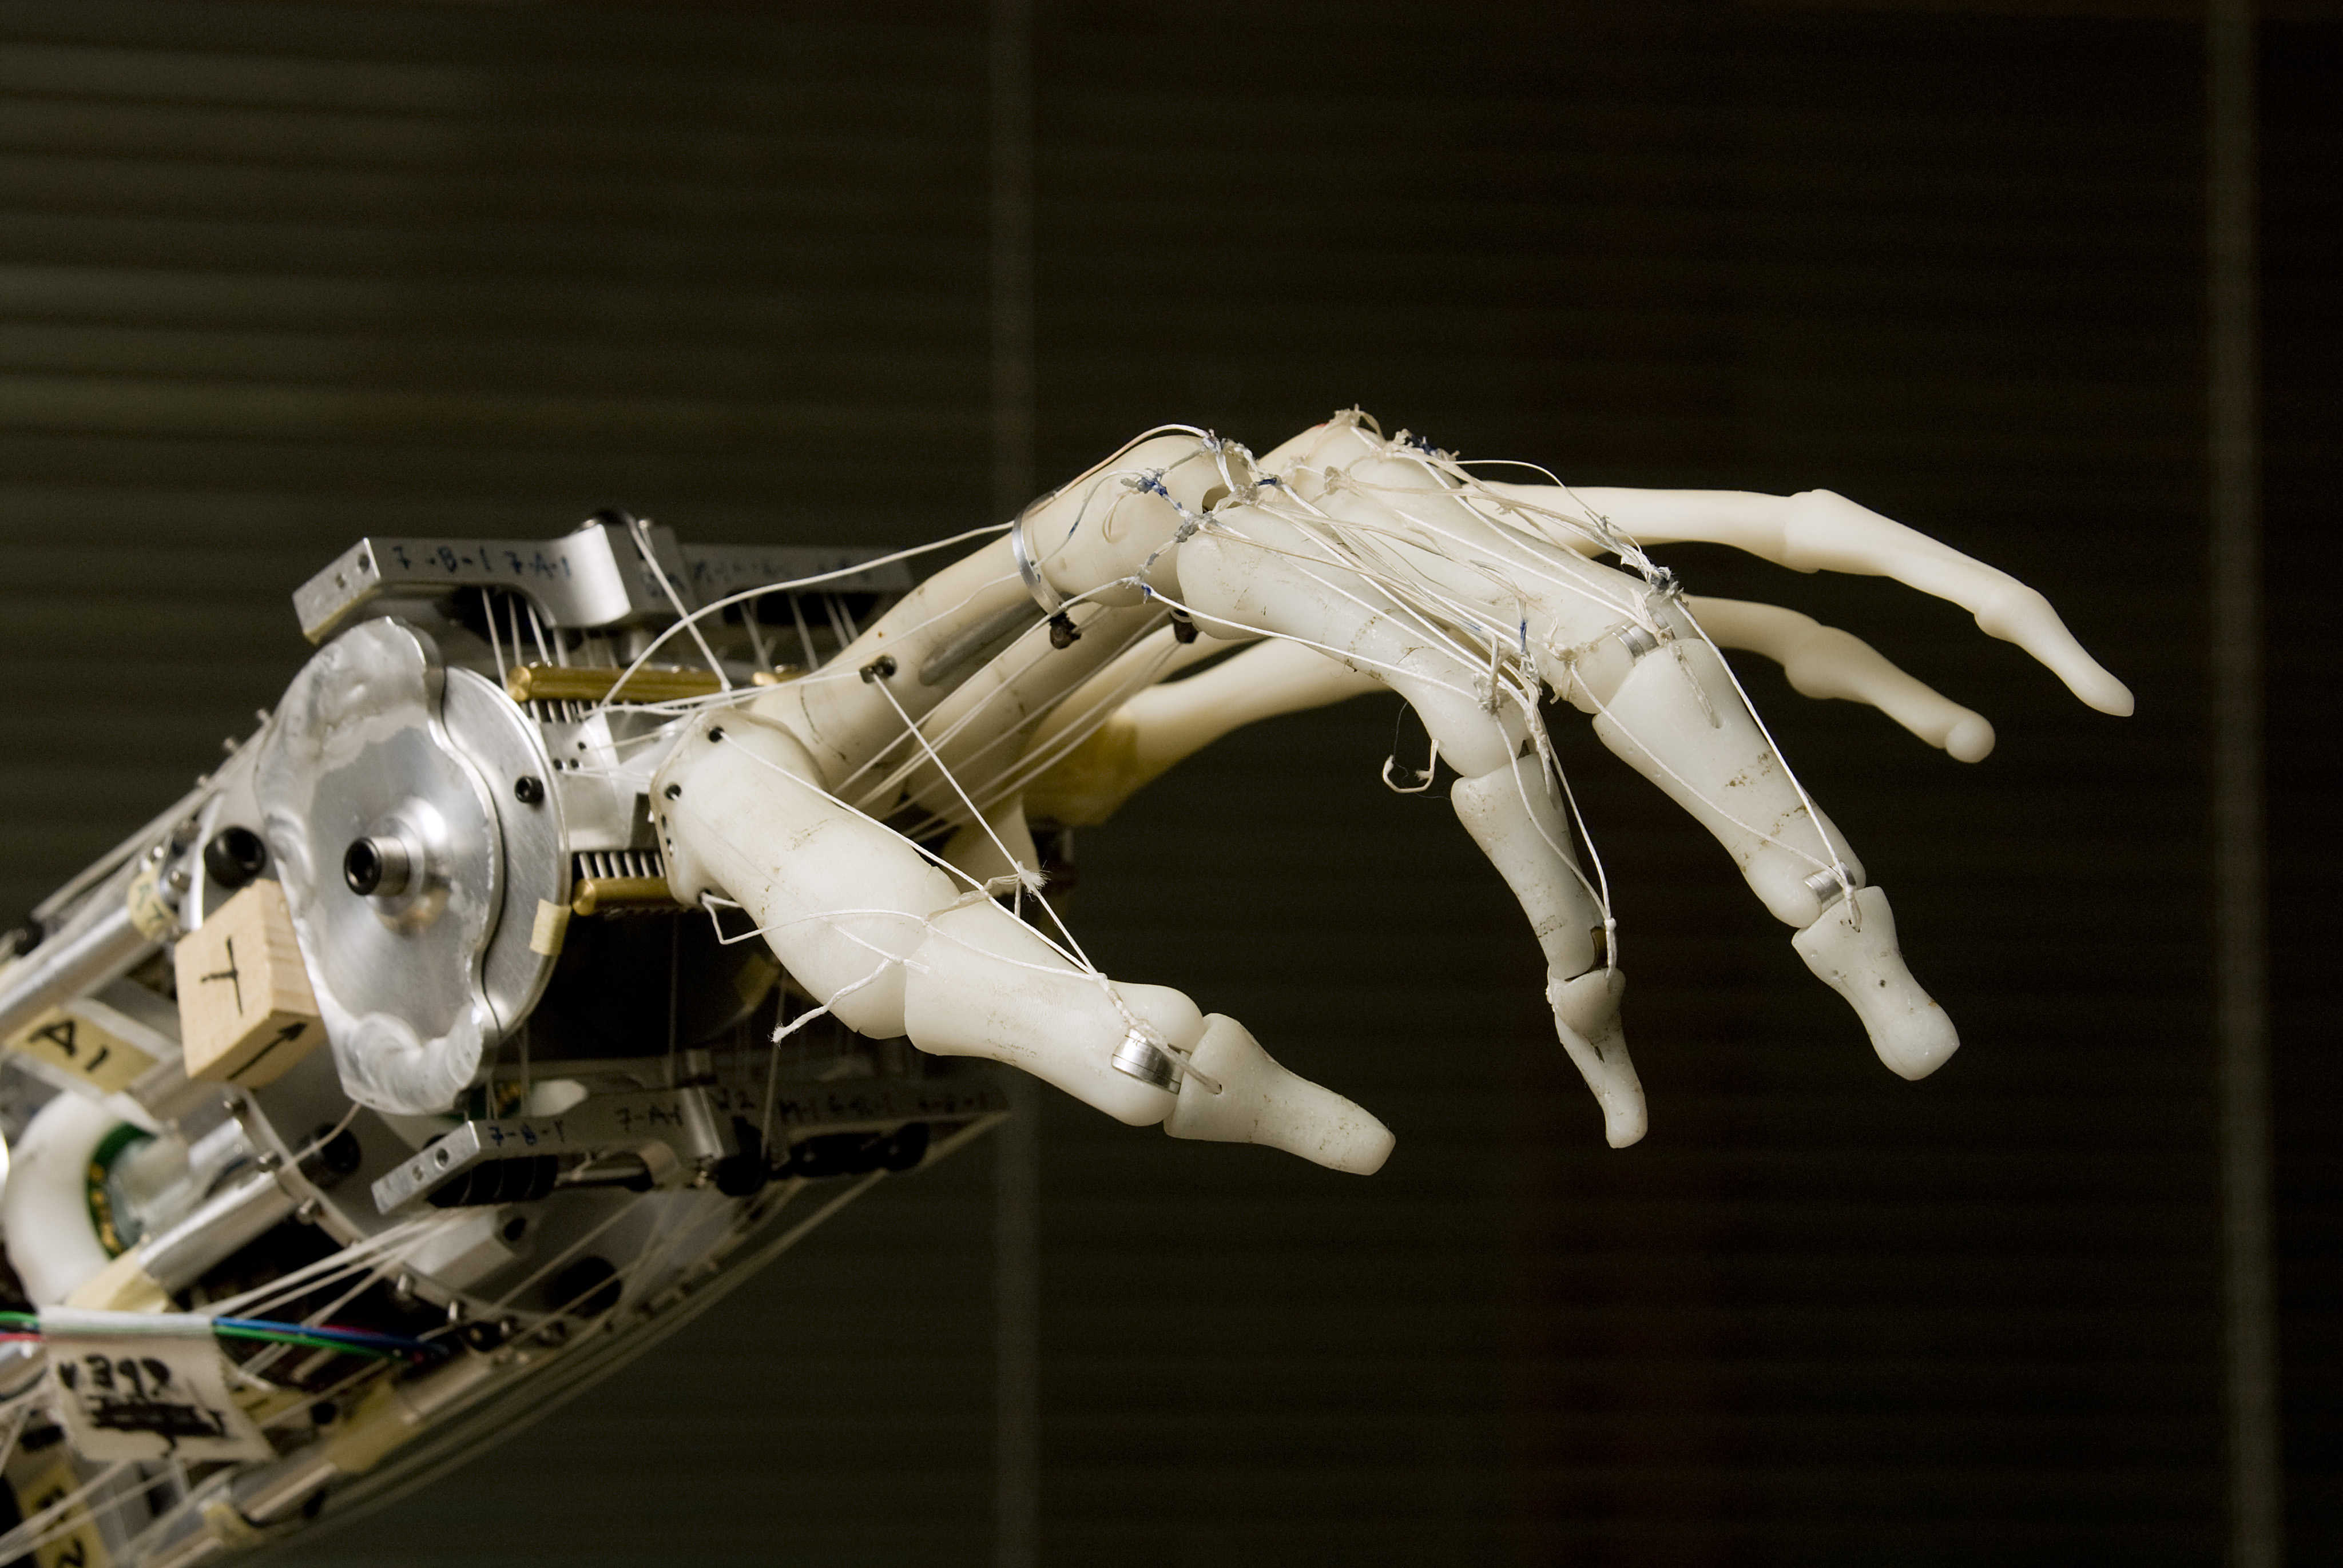 Apple's latest hire specialized at building robotic hands.